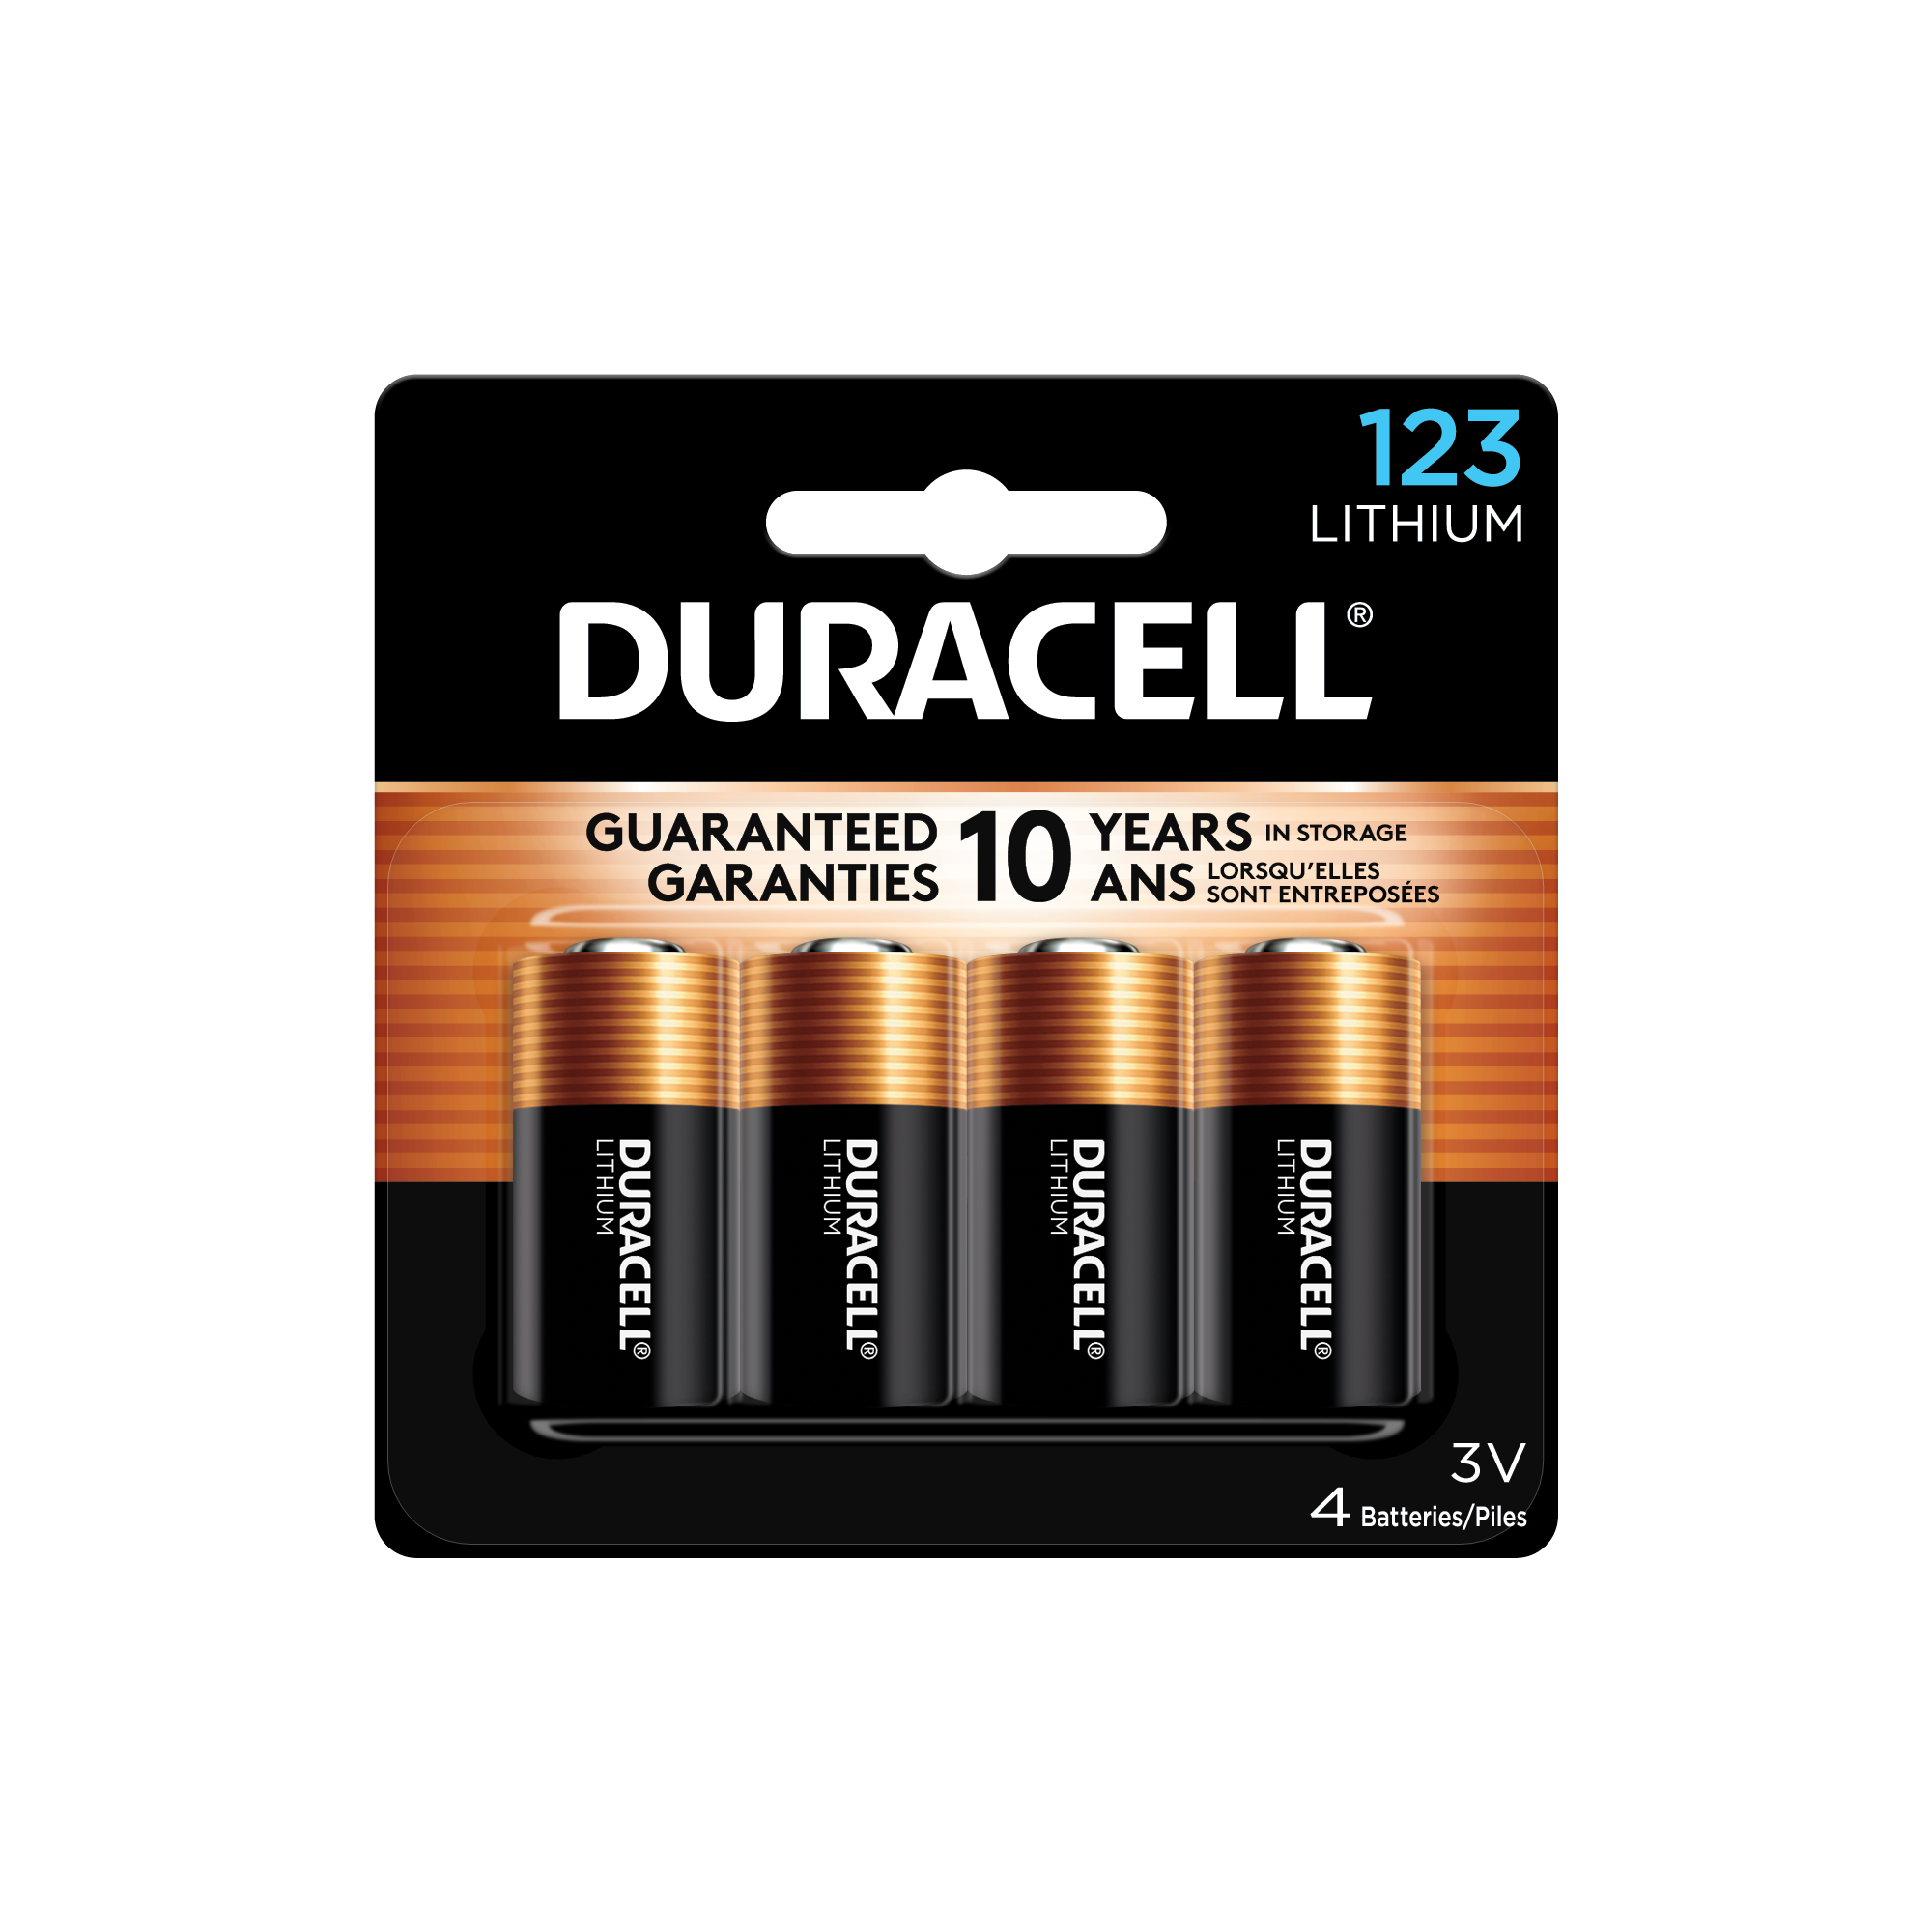 4 x DURACELL DL/CR 2032 3V Lithium Coin Cell Battery Batteries LONGEST  EXPIRY